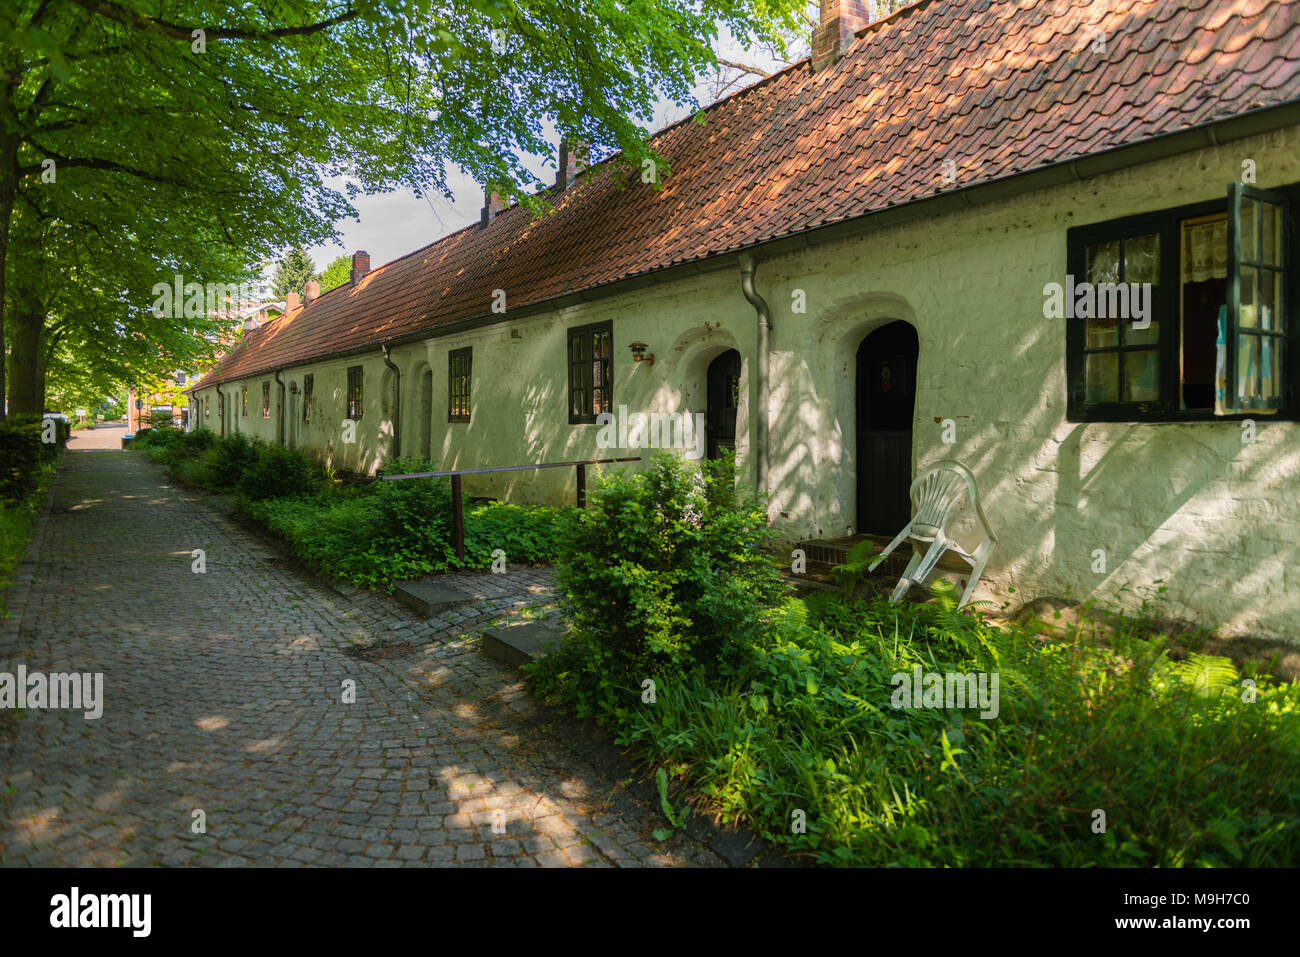 Historic almshouse with flats for the poor and sick, Ahrensburg, Storman, Schleswig-Holstein, Germany, Europe Stock Photo